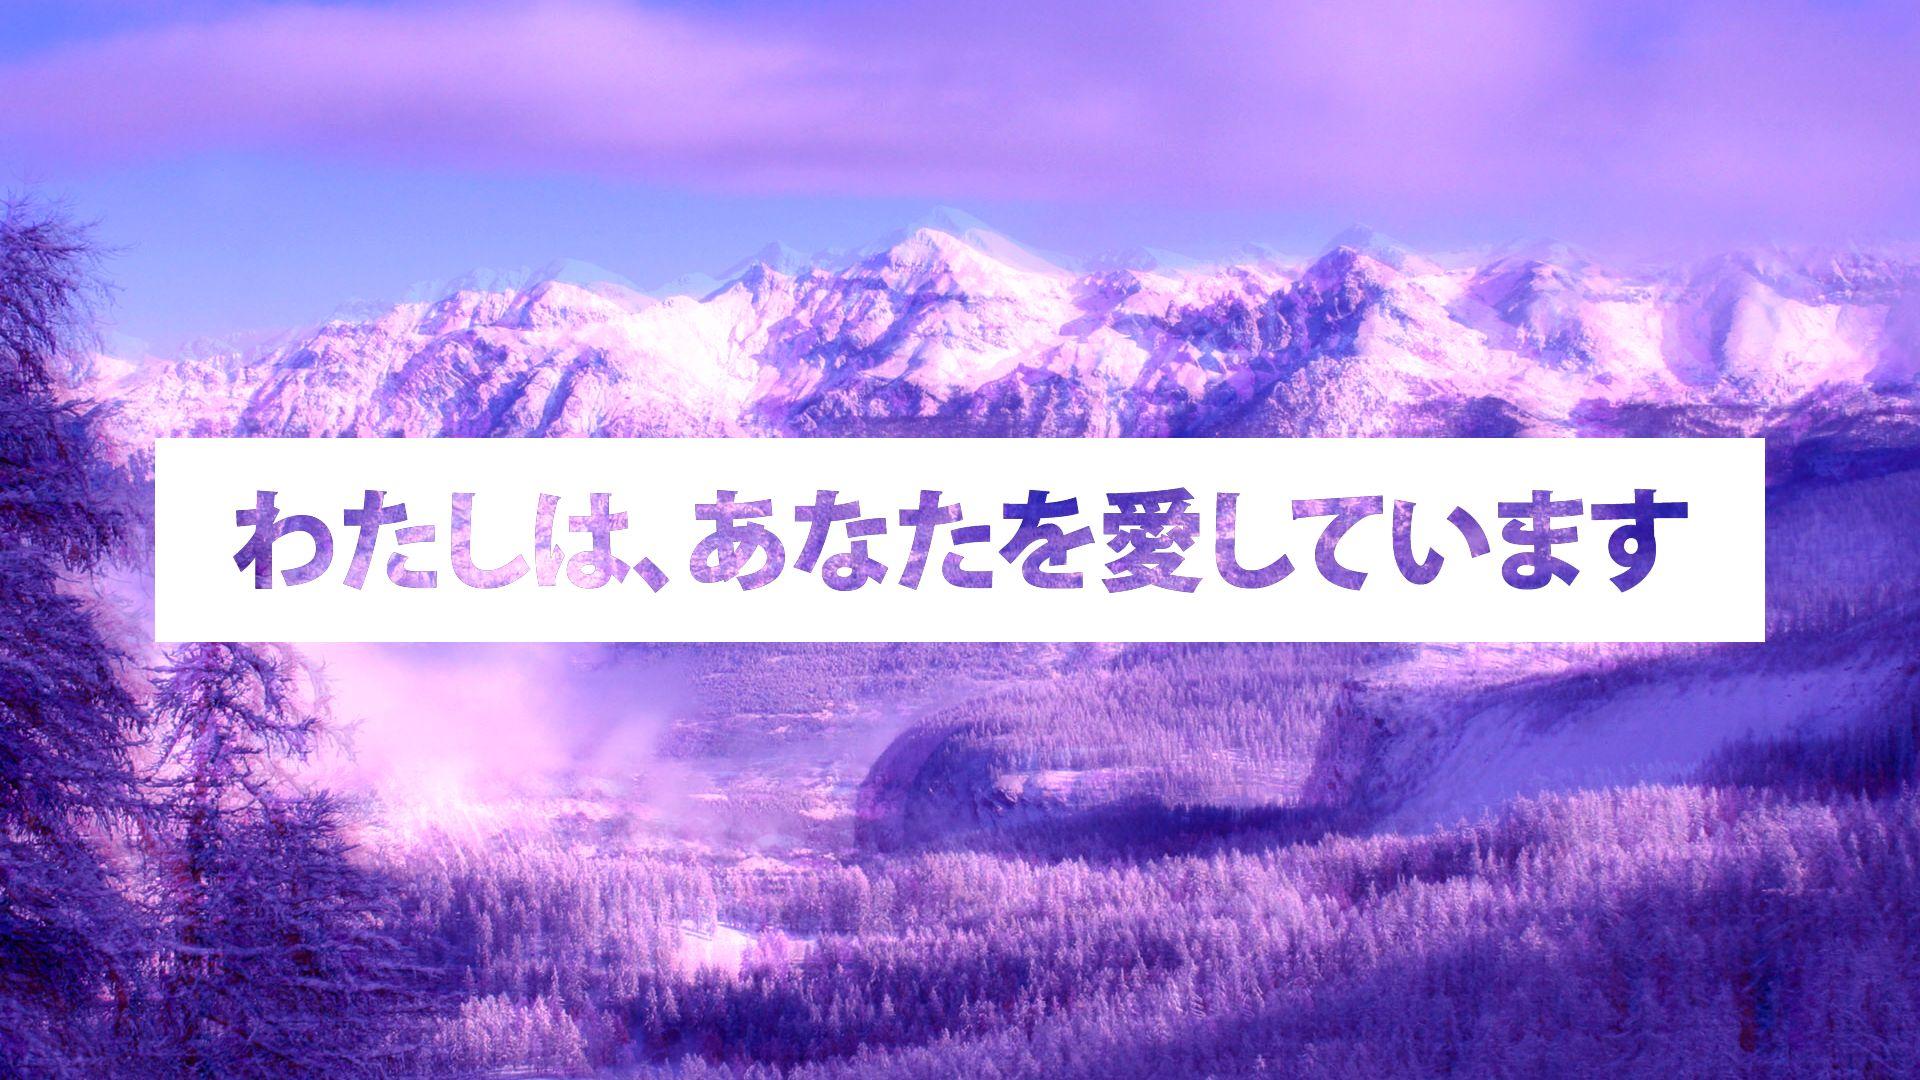 Aesthetic Japanese Text Wallpapers